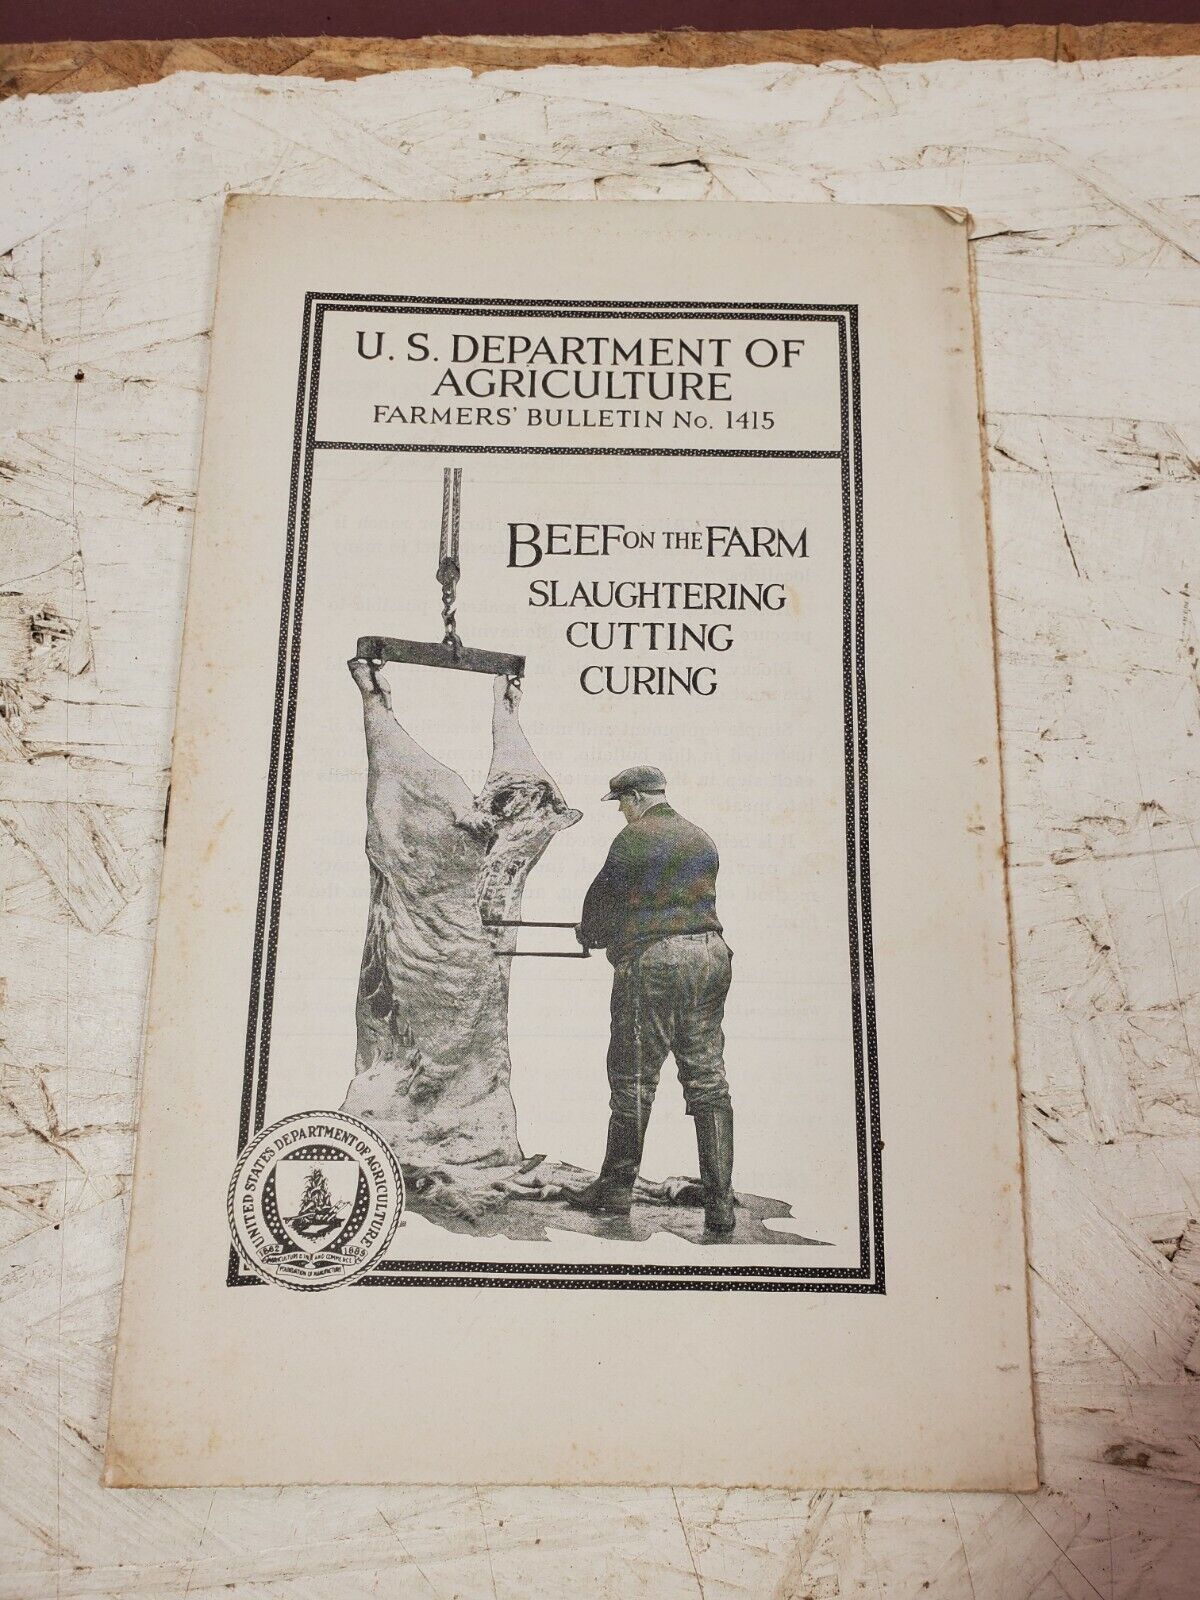 1940 USDA Farmers\' Bulletin No. 1415 - Beef on the Farm: Slaughtering, Cutting